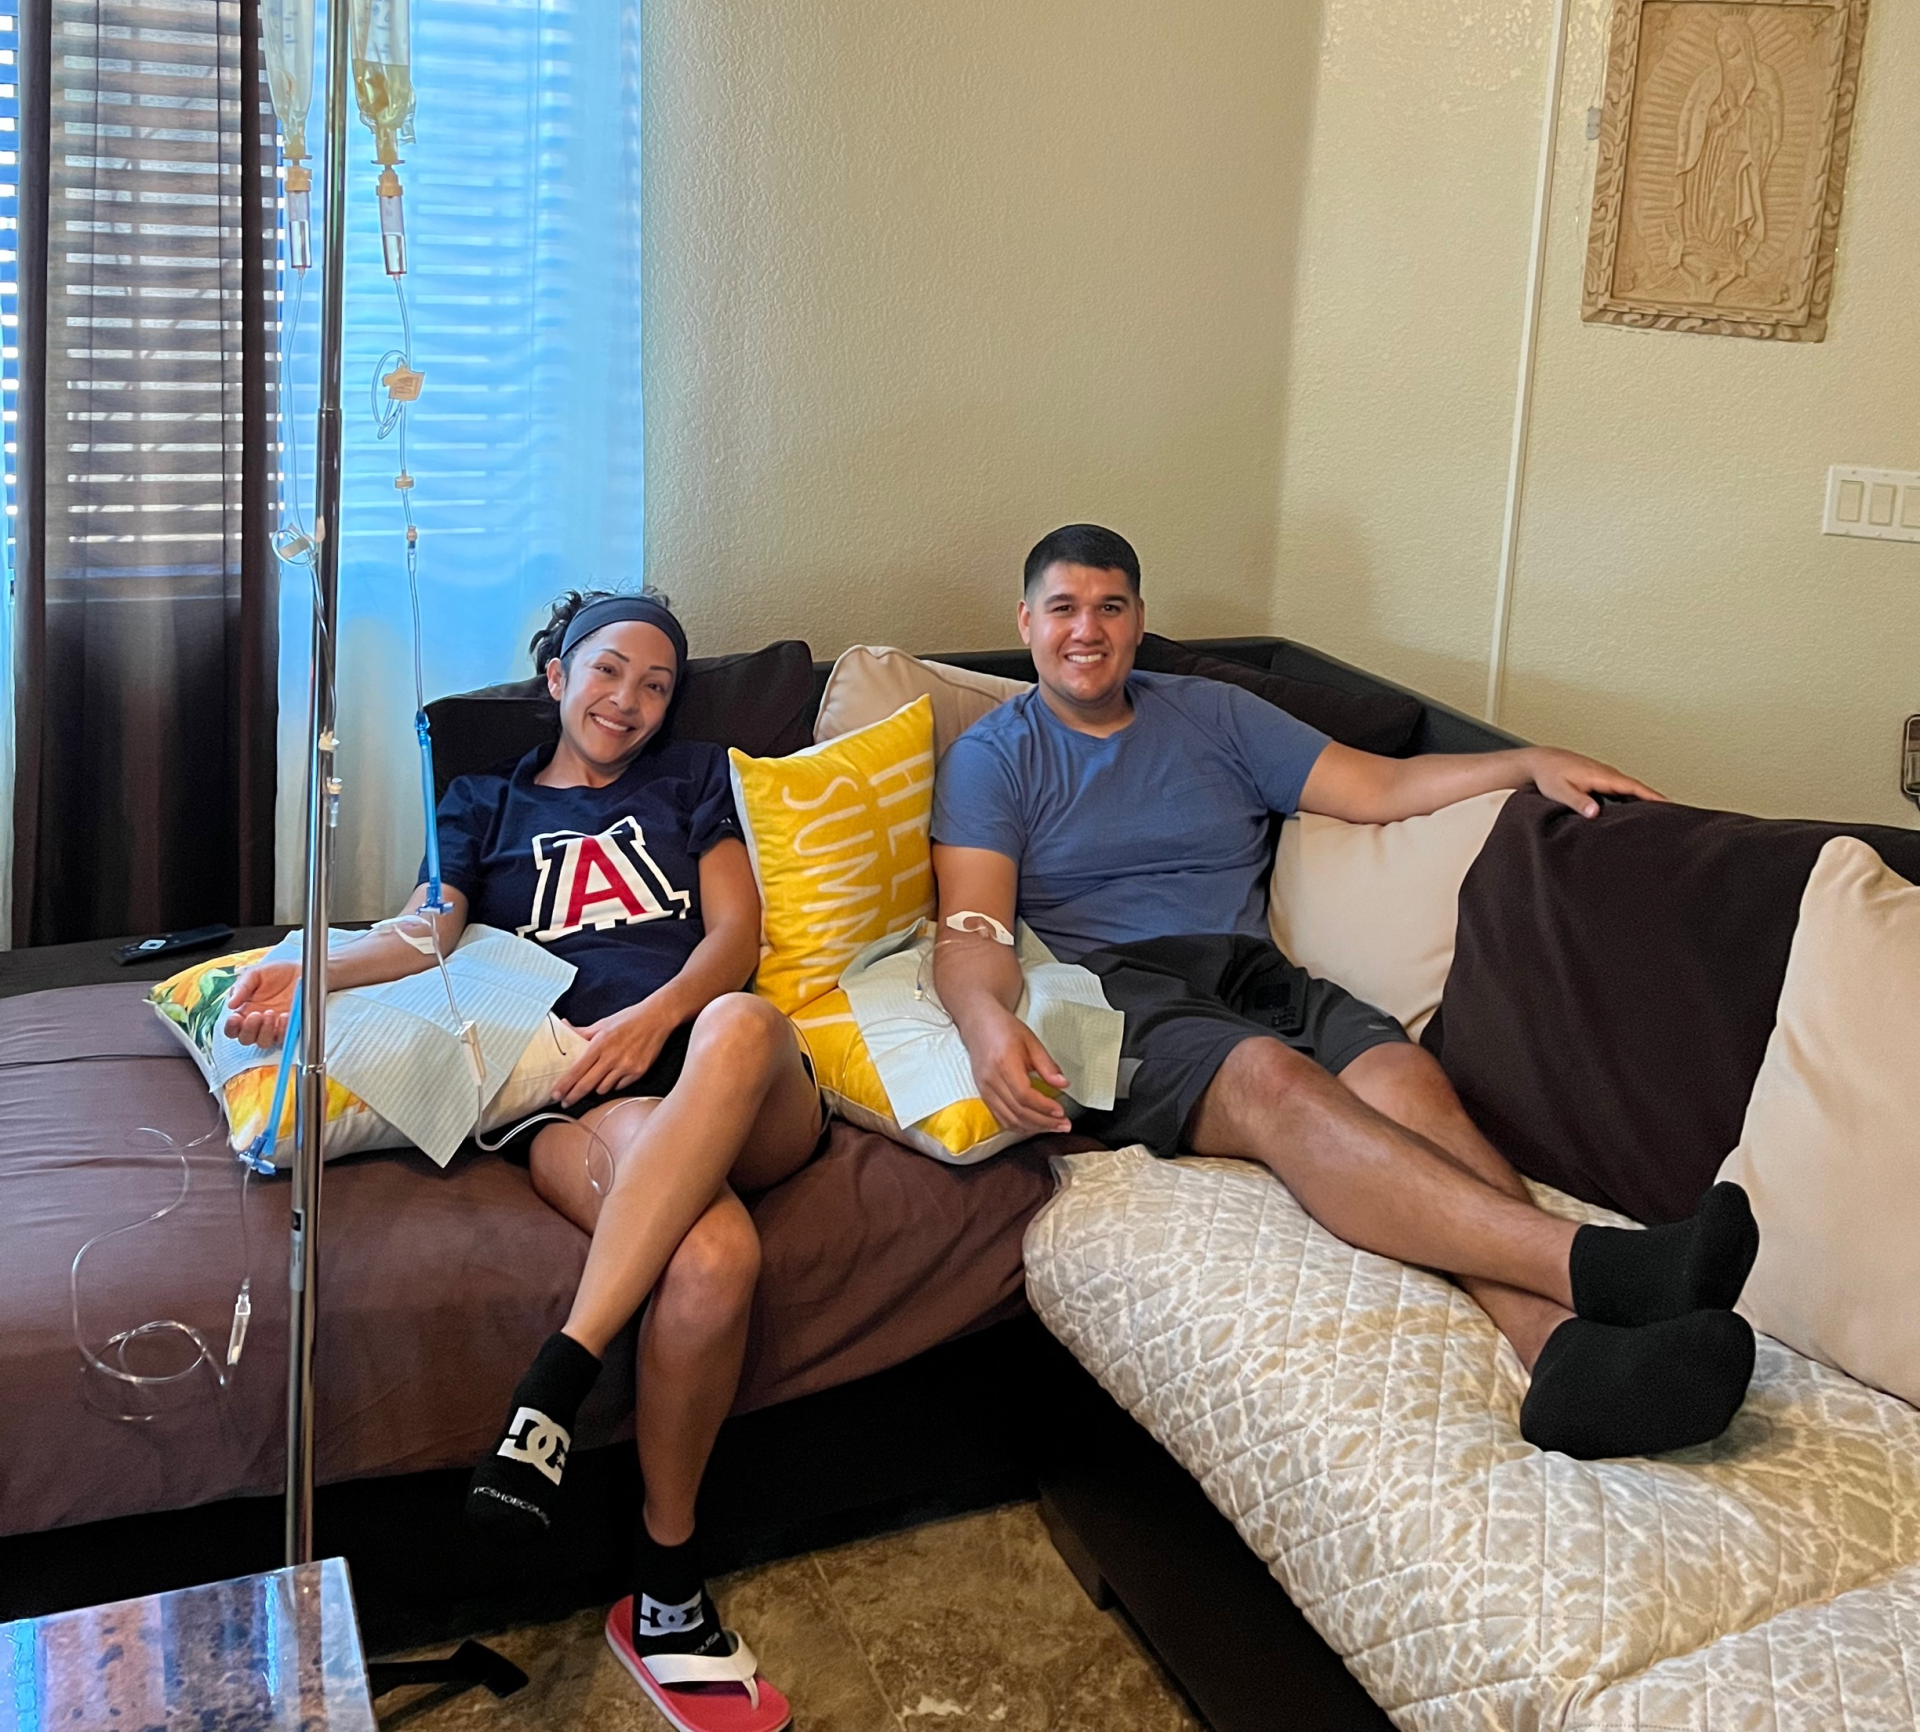 A man and a woman are sitting on a couch in a living room.